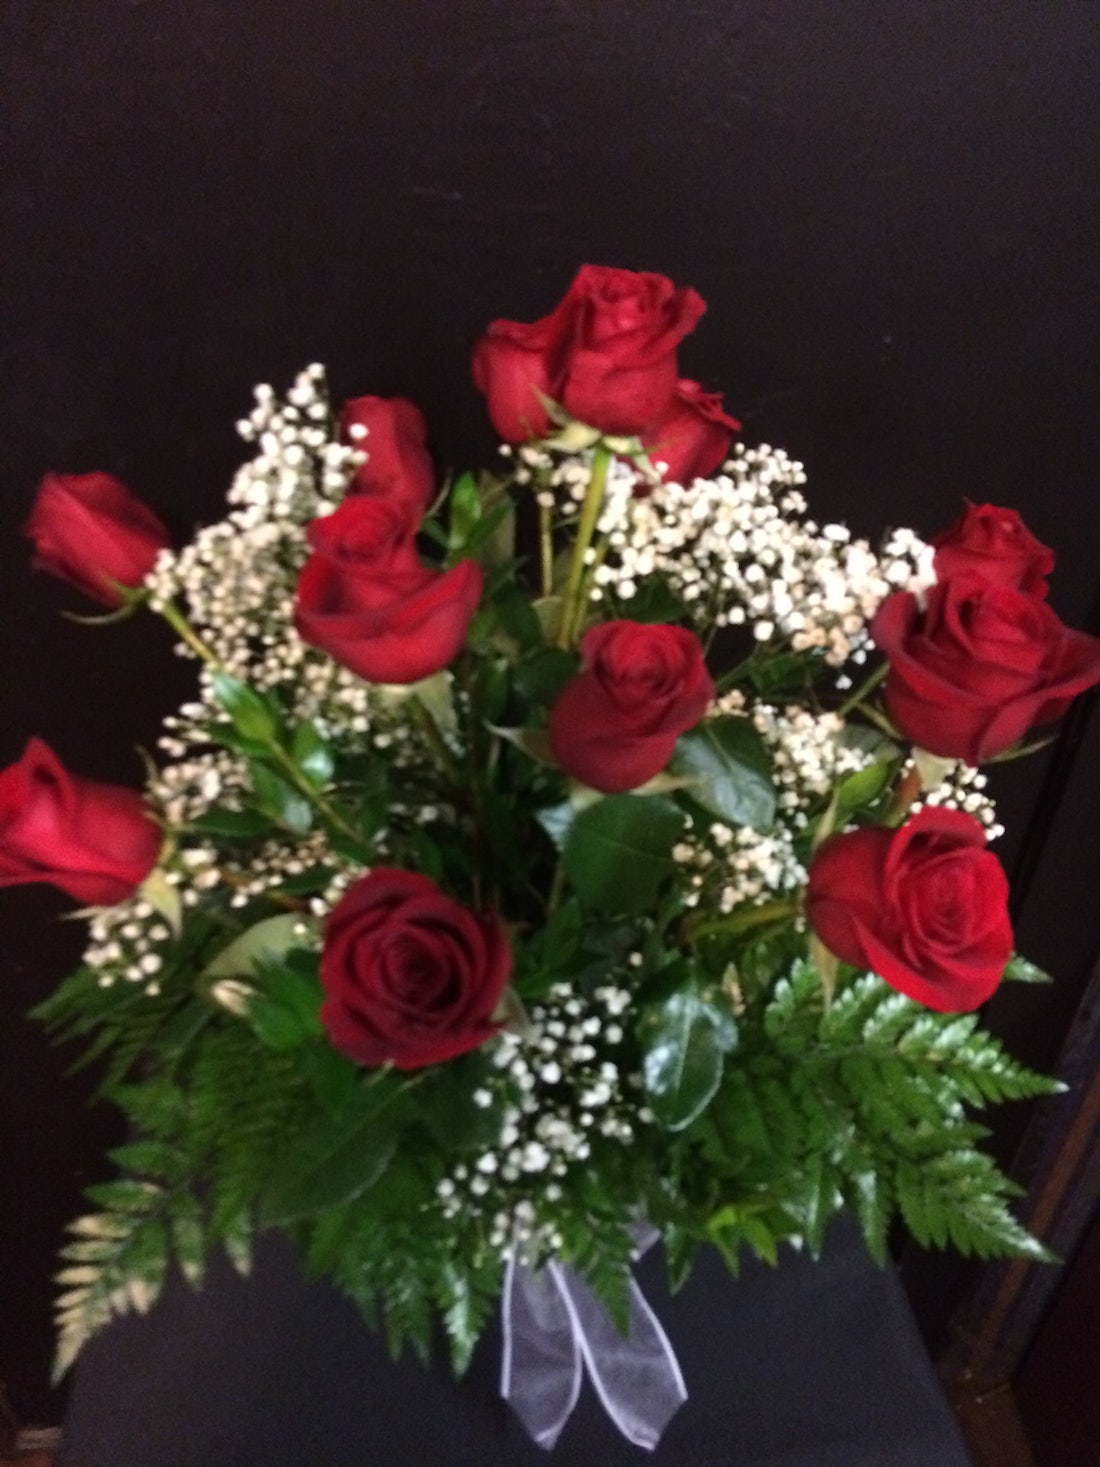 1 Dozen Roses In a Vase With Baby's Breath